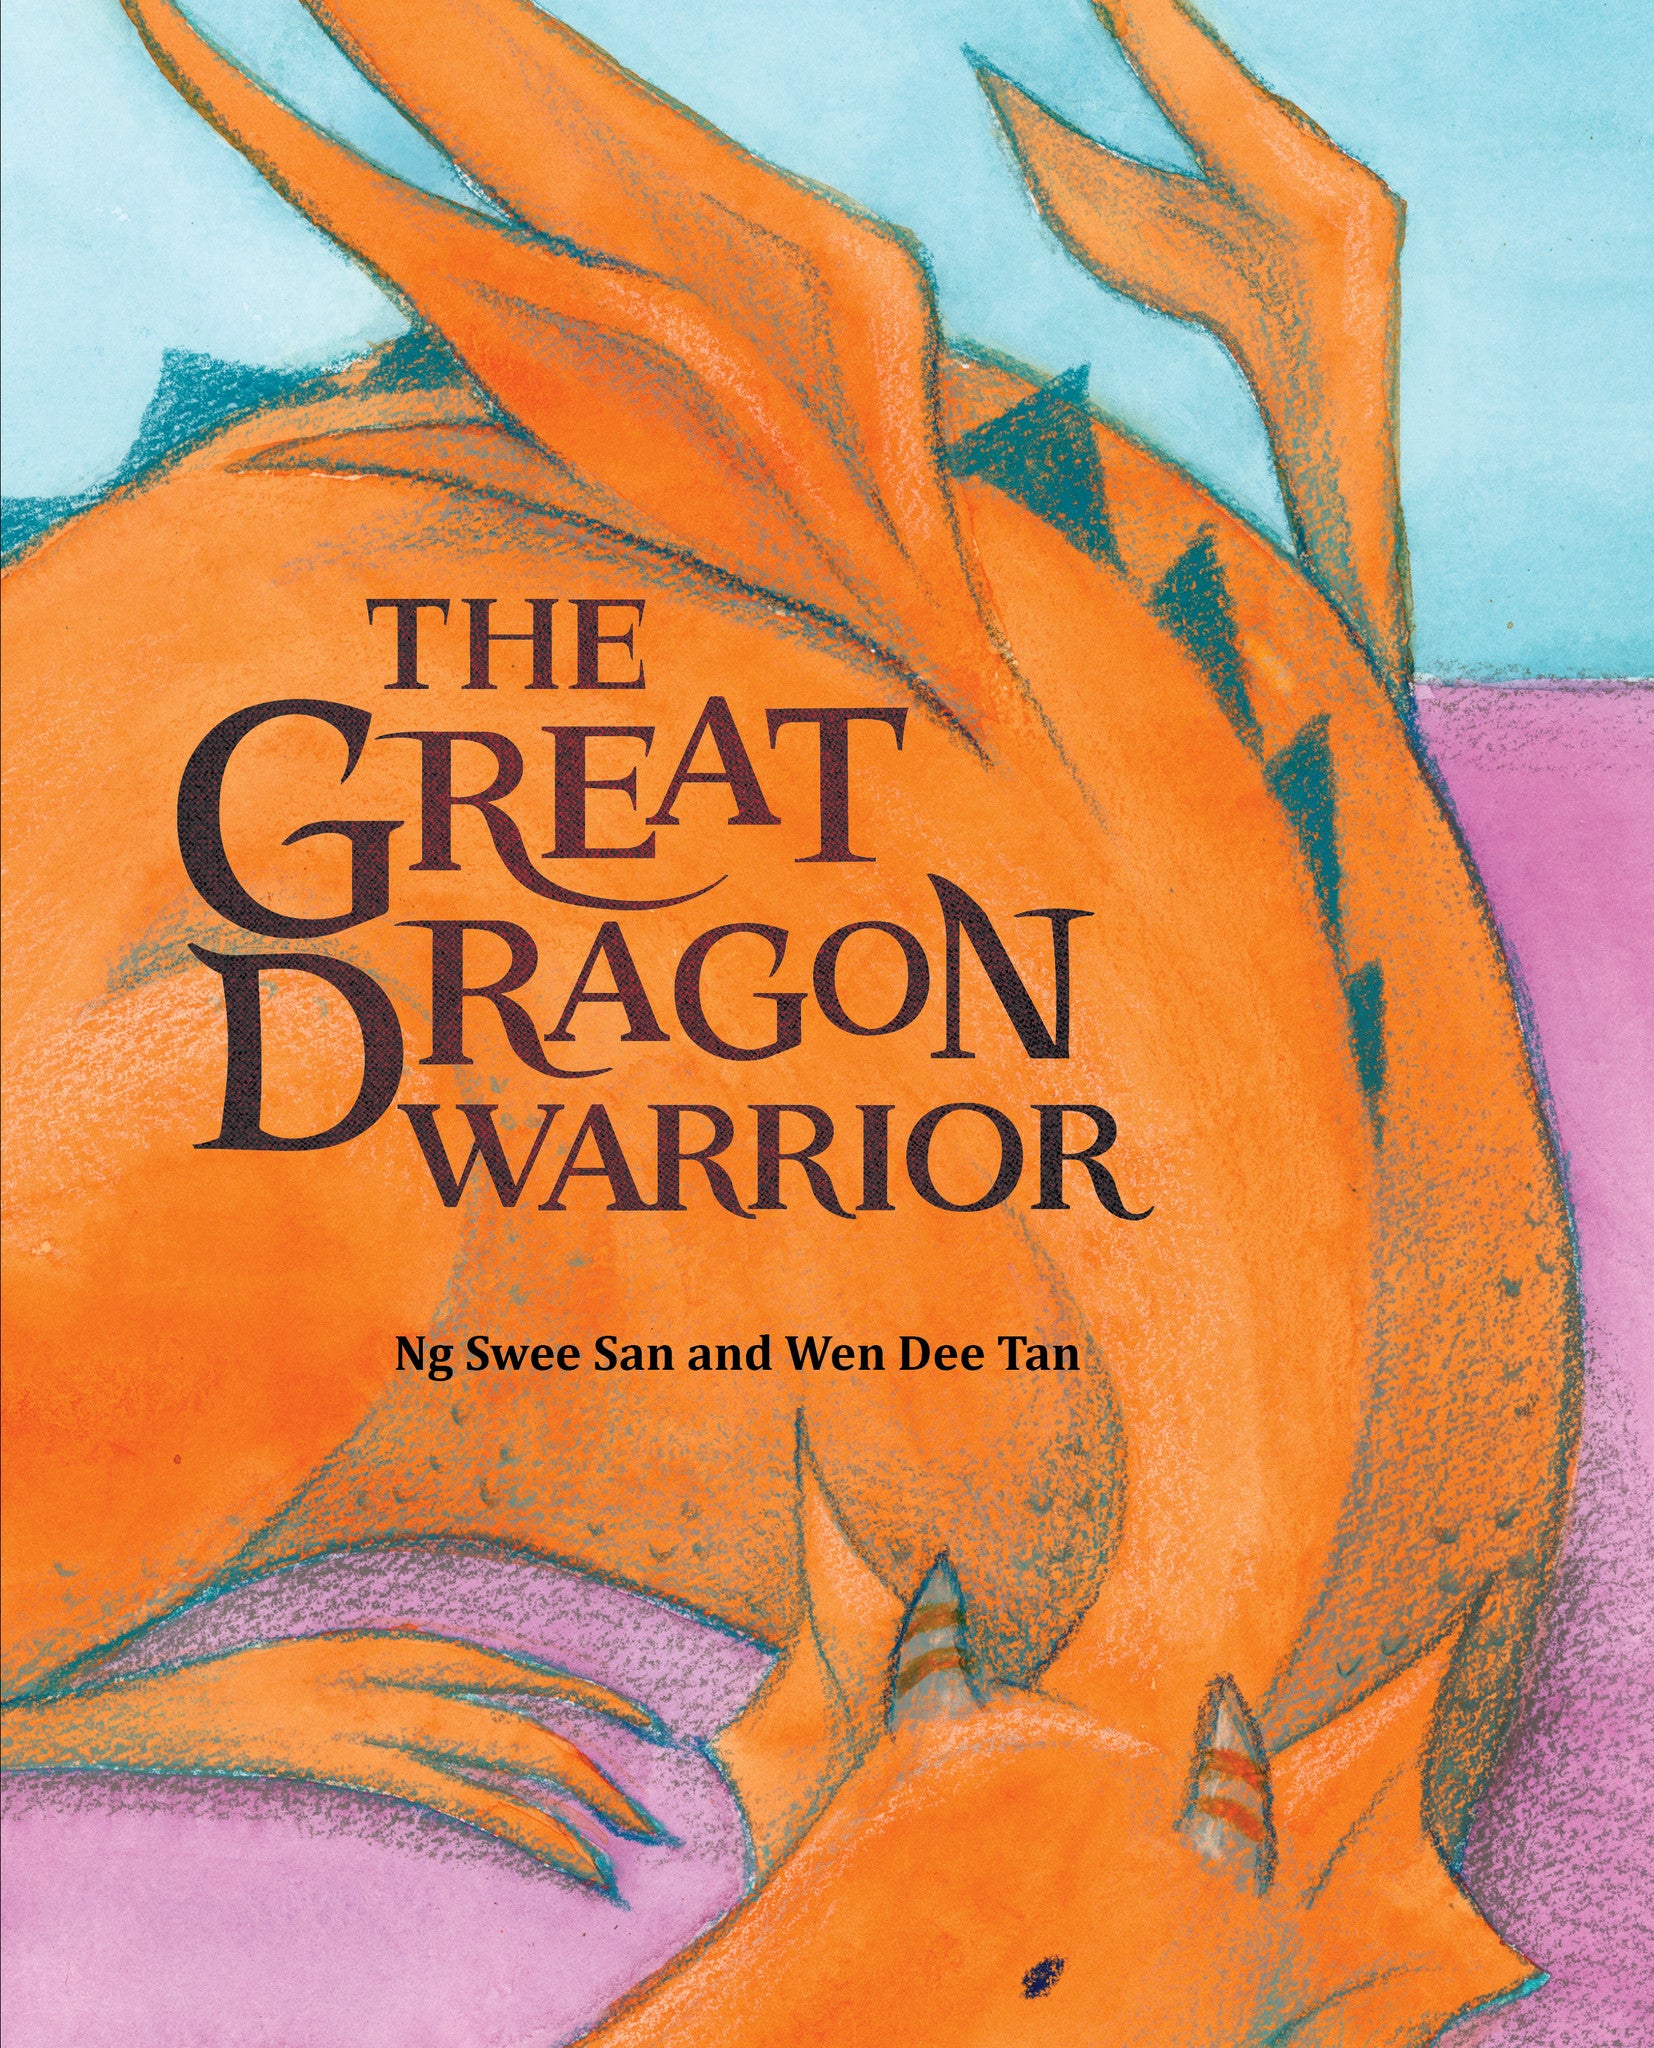 The Great Dragon Warrior